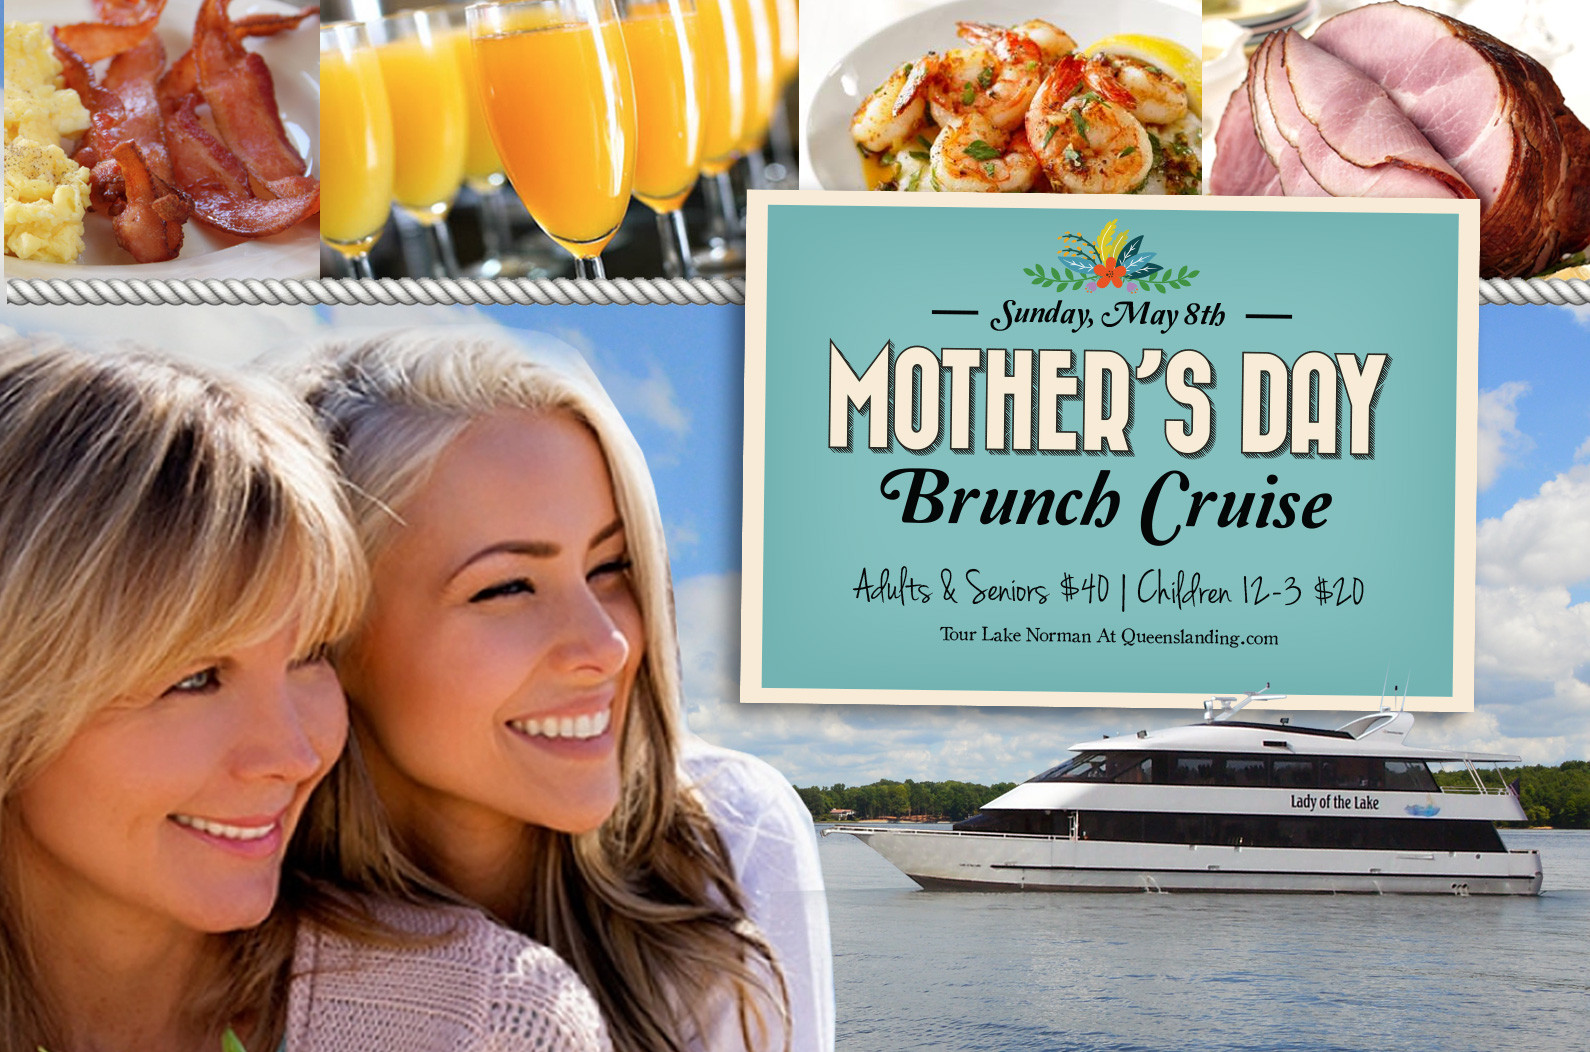 captain cook cruises mother's day